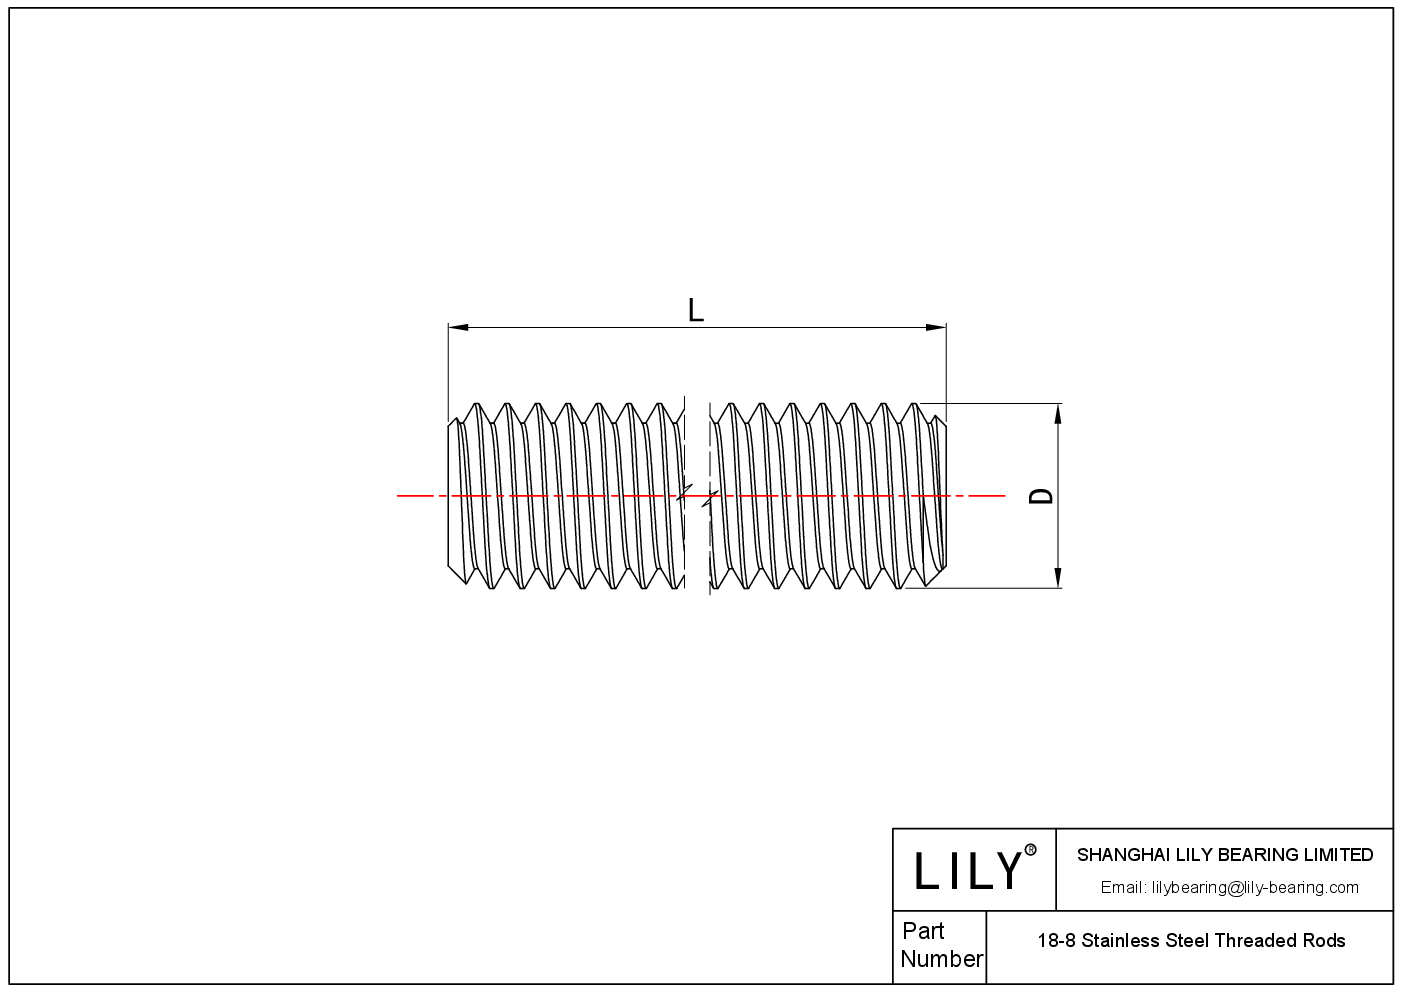 JFEBCAIFB 18-8 Stainless Steel Threaded Rods cad drawing